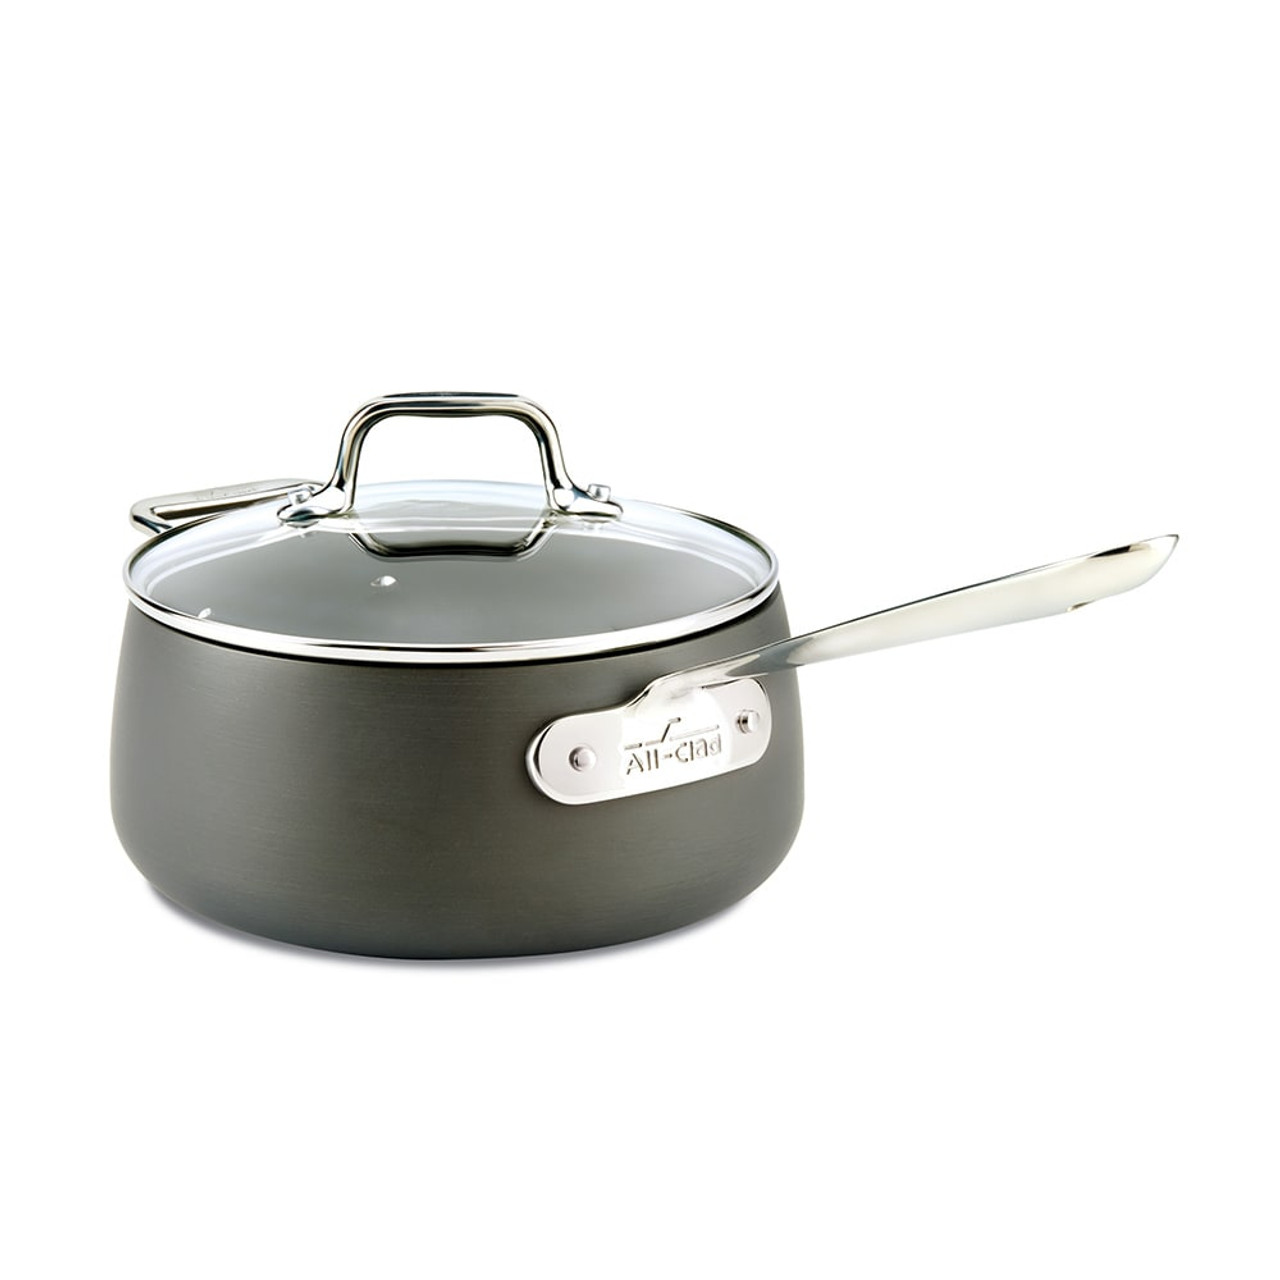 https://cdn11.bigcommerce.com/s-hccytny0od/images/stencil/1280x1280/products/519/8409/all-clad-ha1-sauce-pan-3-5qt__63143.1576080481.jpg?c=2?imbypass=on